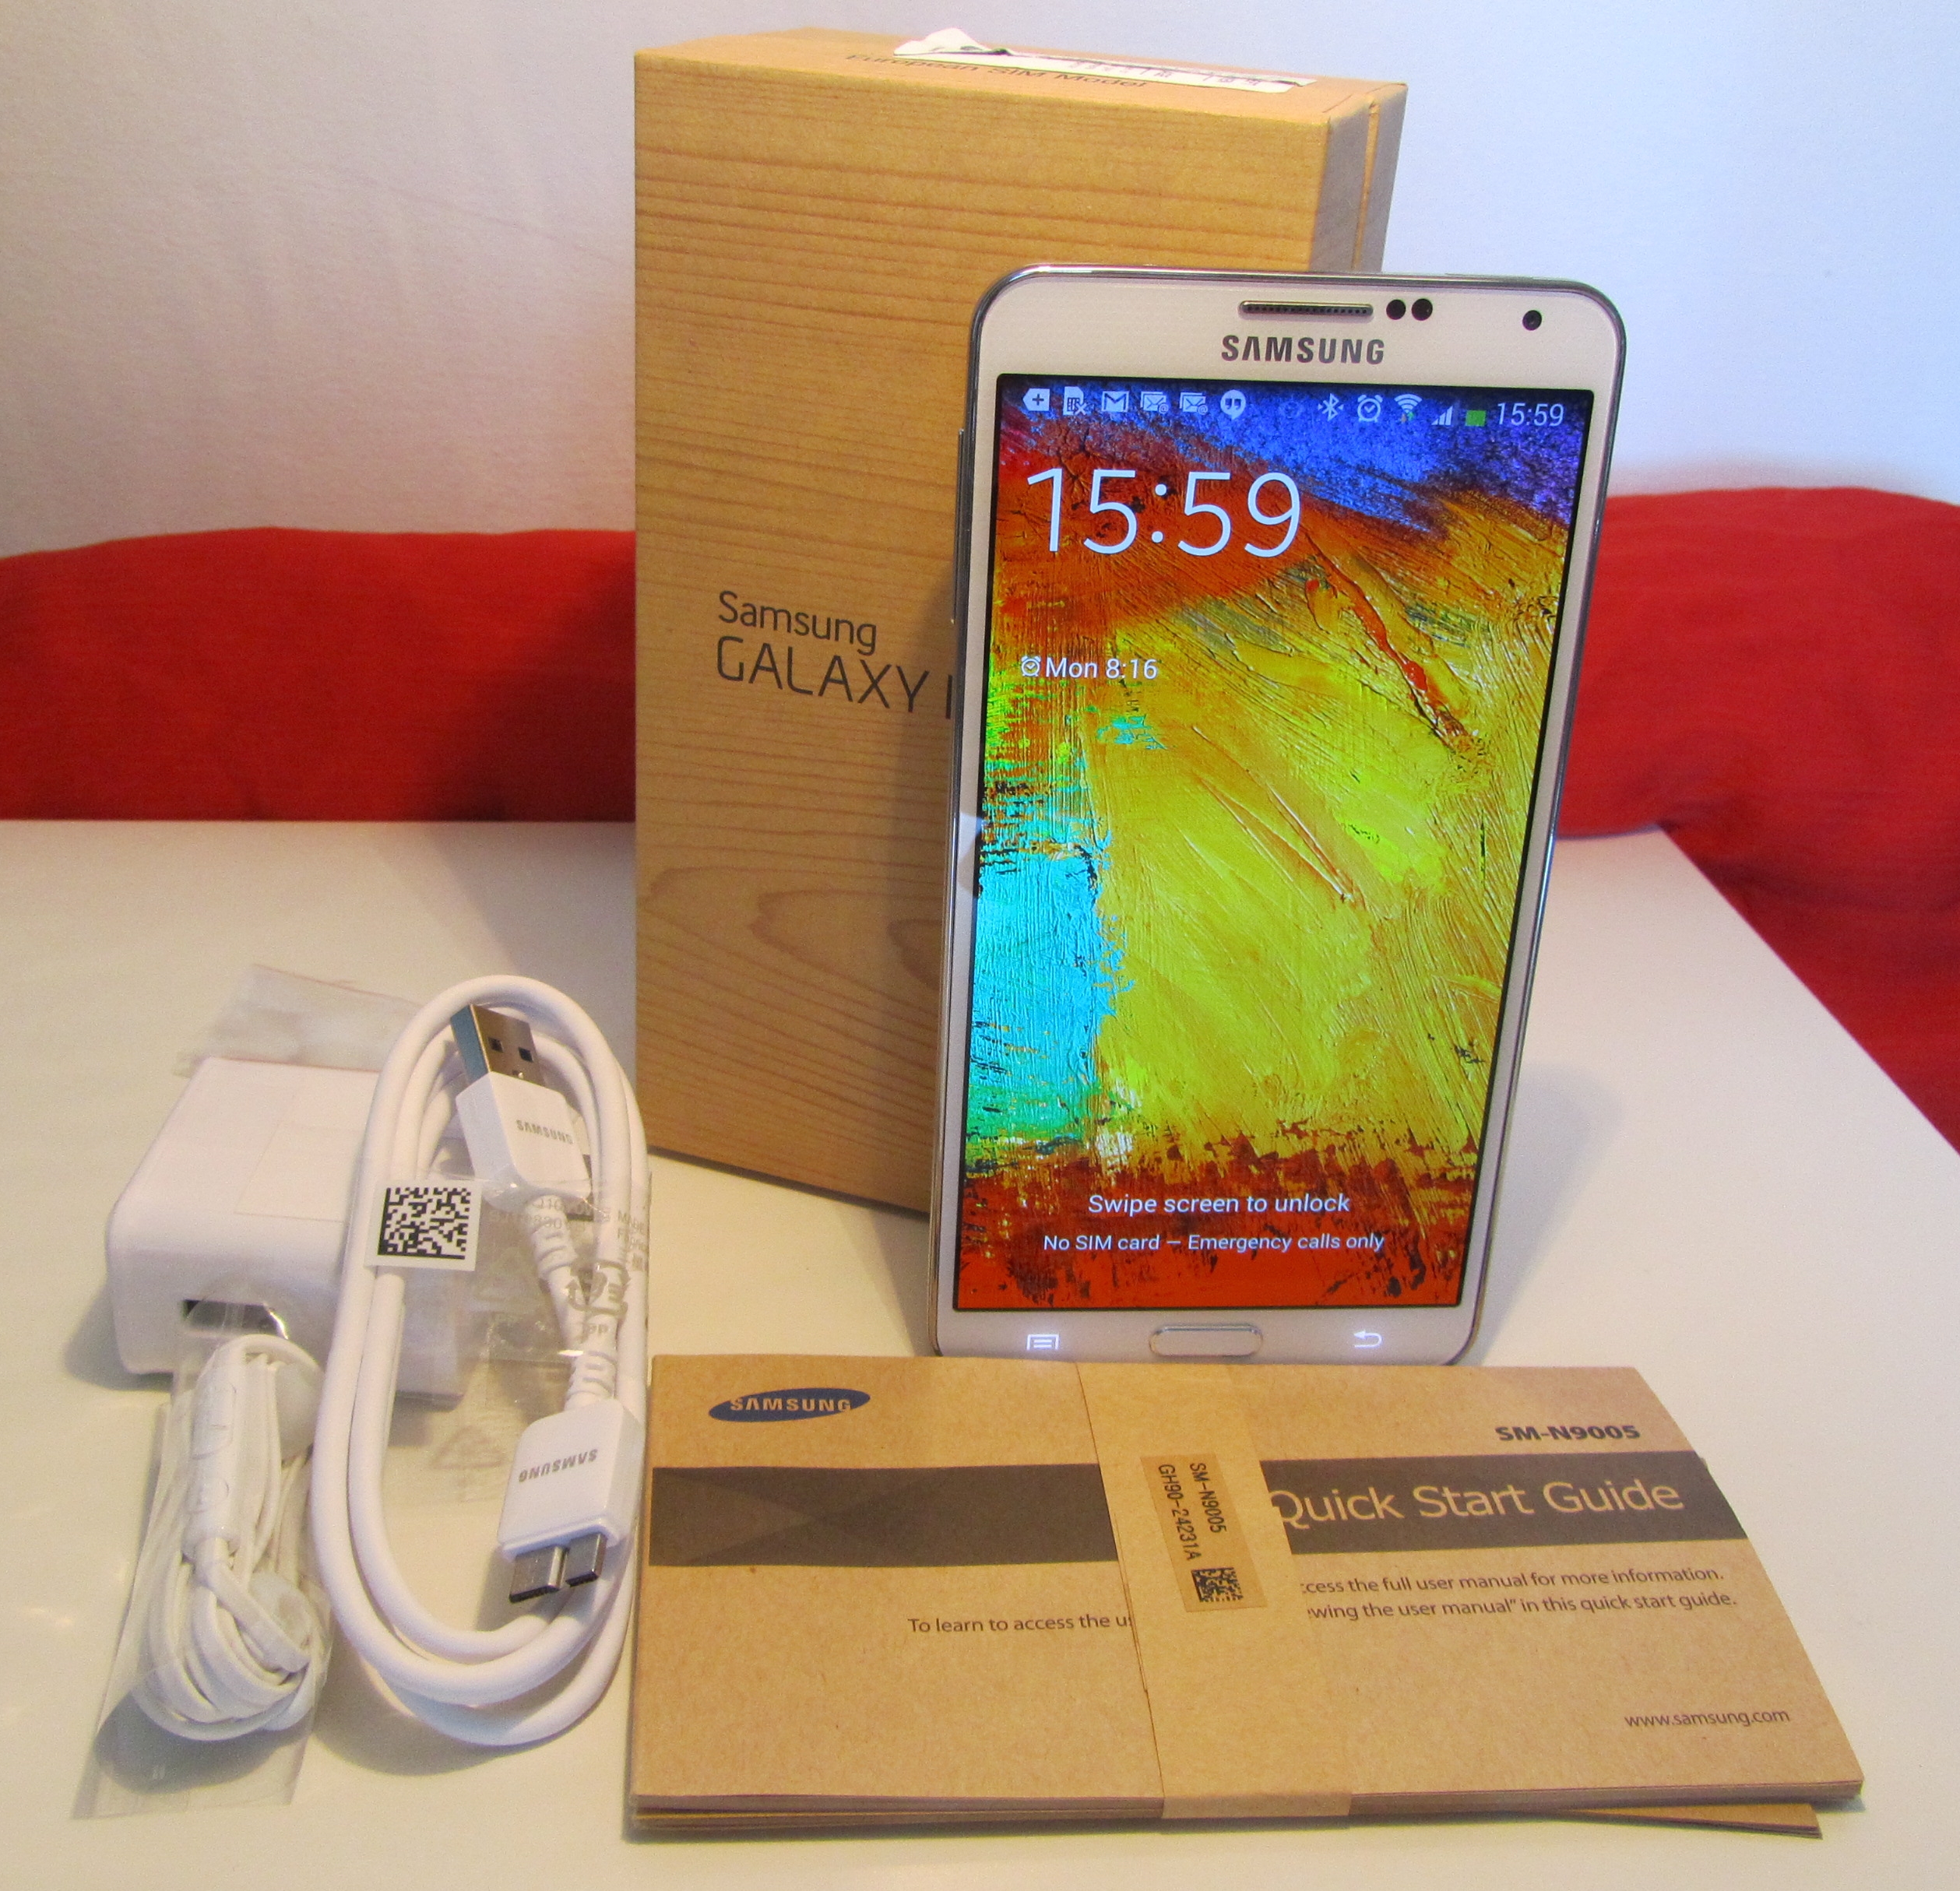 Note3 unboxing1 Samsung Galaxy Note 3 review: One of the best Android handsets money can buy, if you can hold it